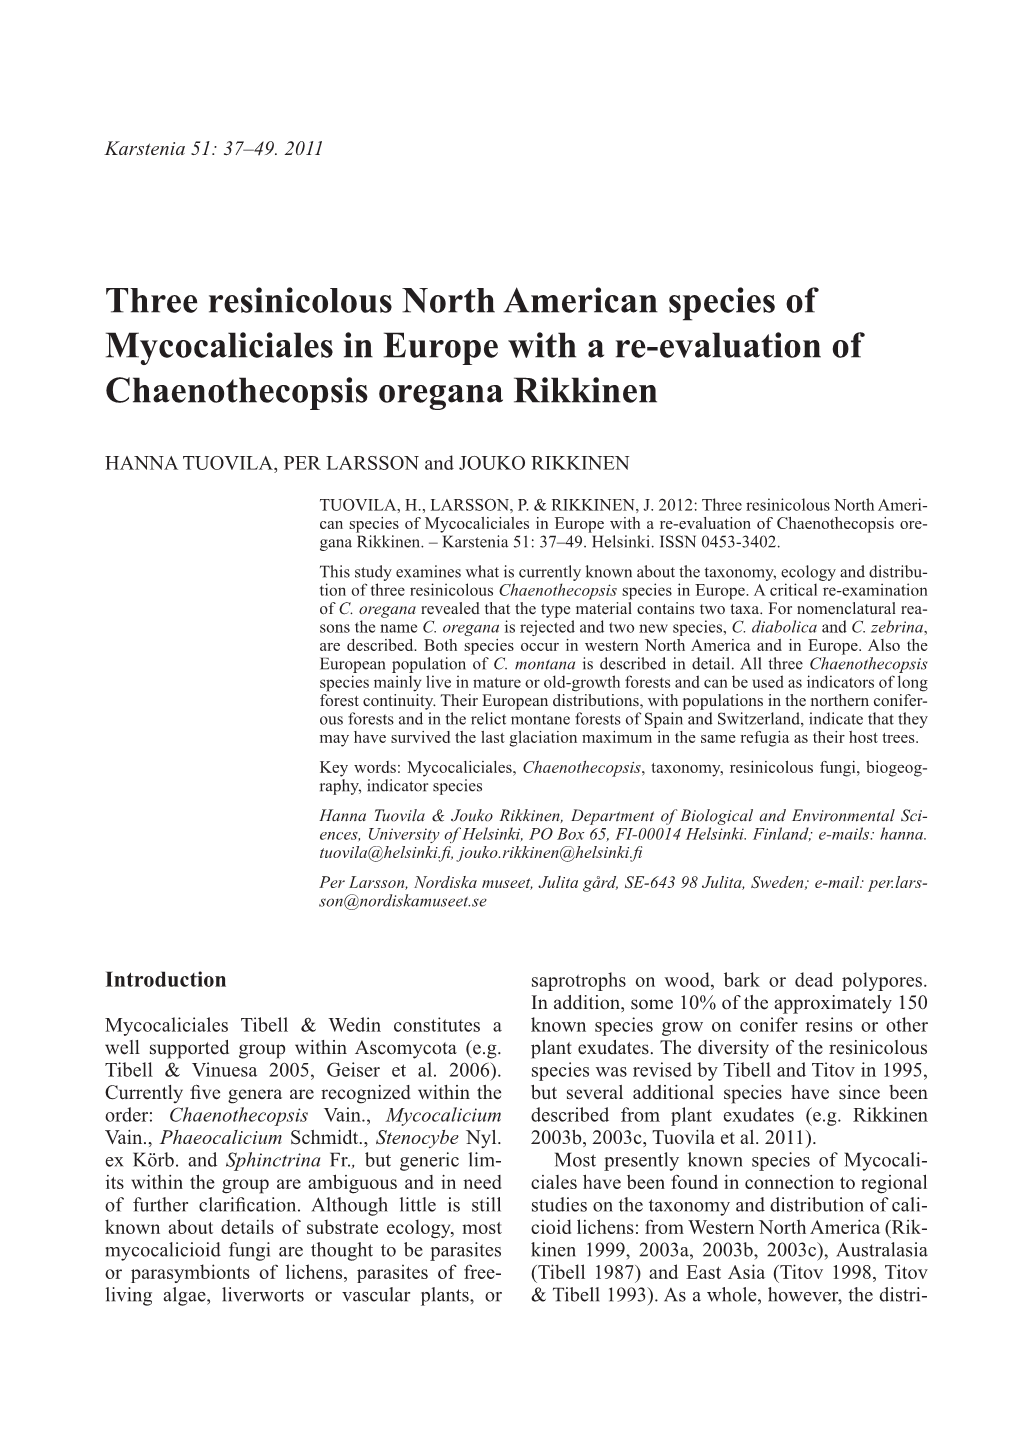 Three Resinicolous North American Species of Mycocaliciales in Europe with a Re-Evaluation of Chaenothecopsis Oregana Rikkinen